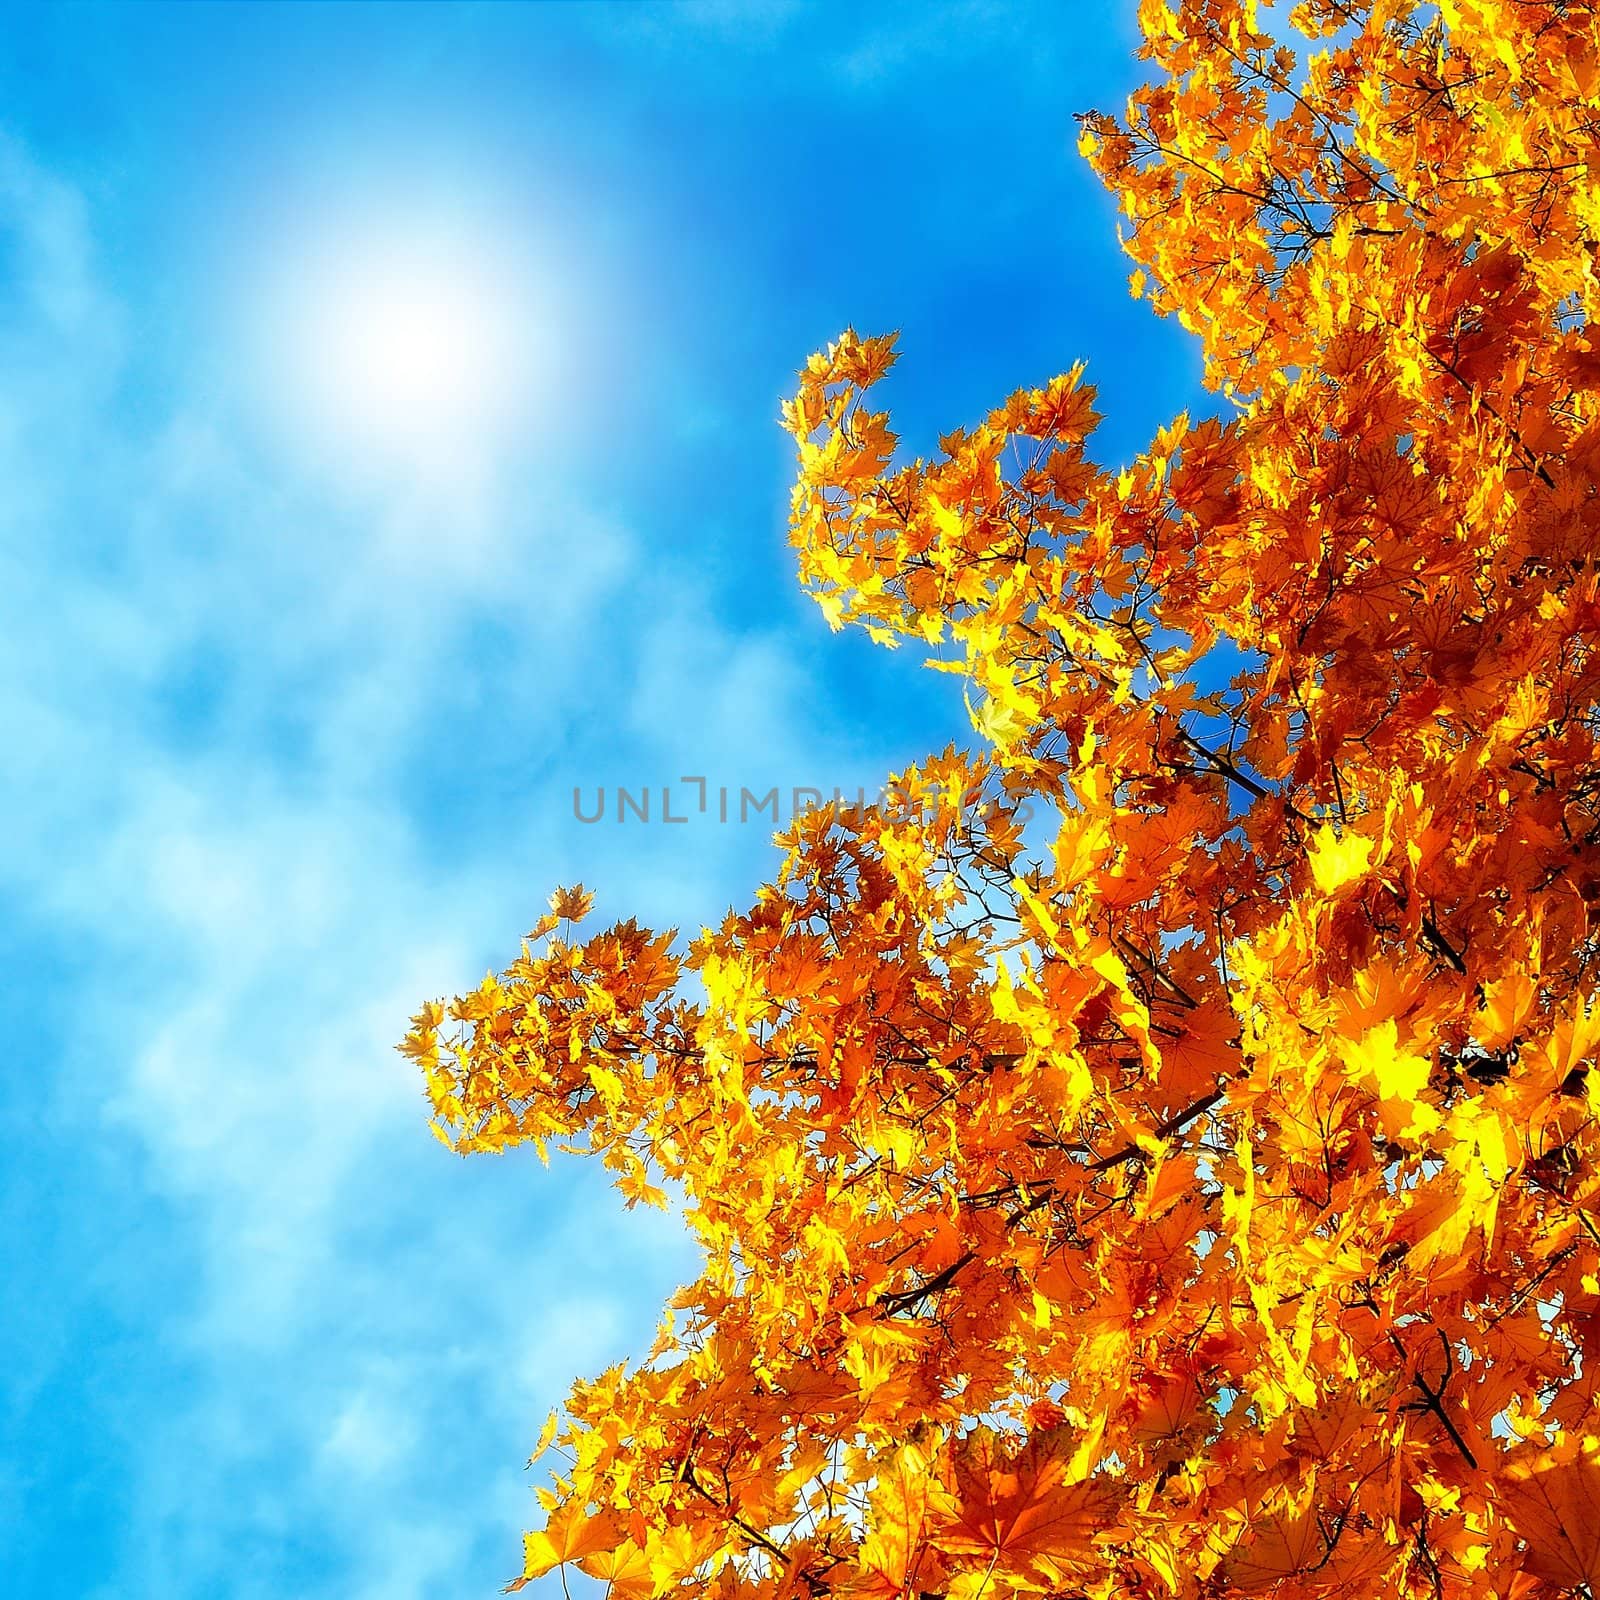 Autumn leaves of maple against the blue sky with bright sunshine